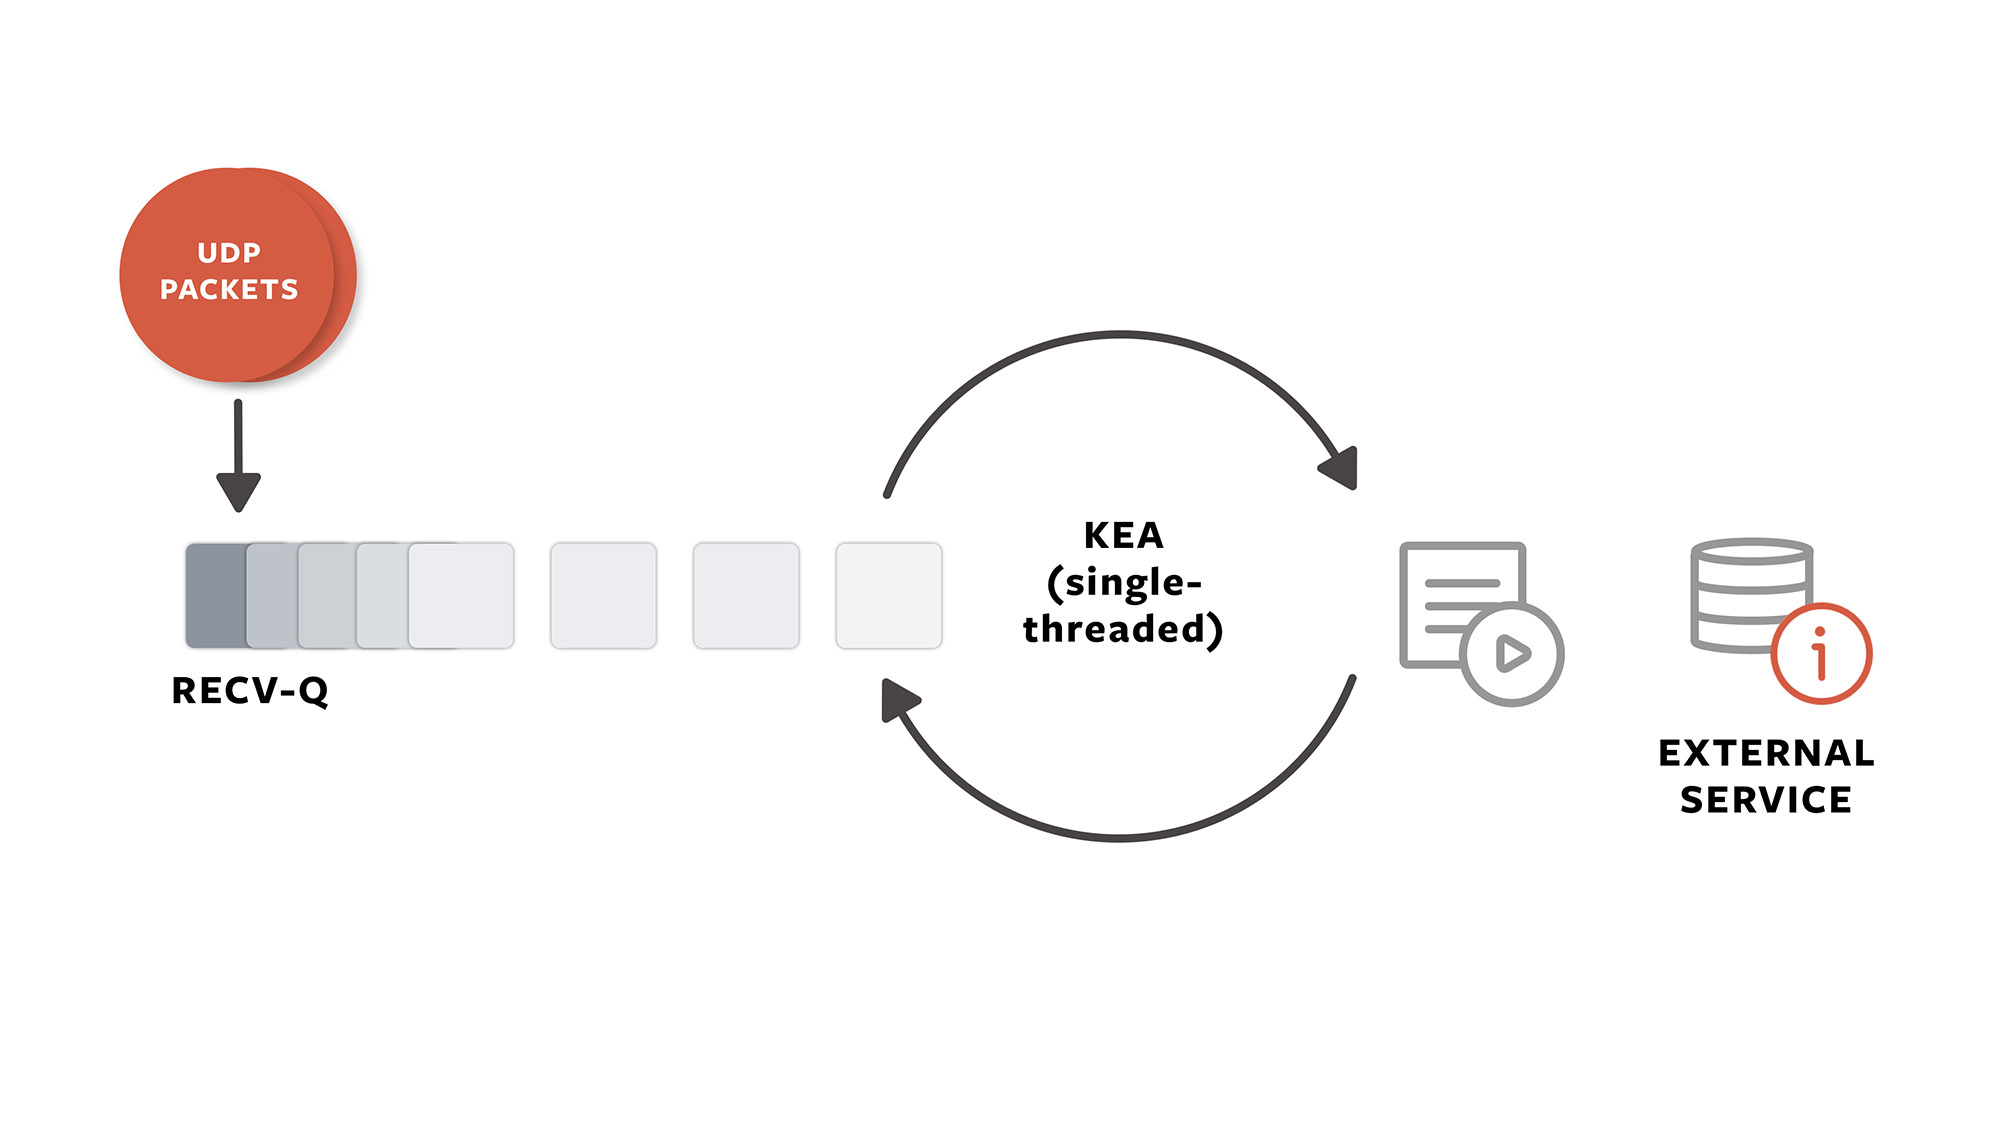 Kea is a single-threaded server. When a request is served, the process blocks while incoming requests queue up in the kernel Recv-Q buffer. 